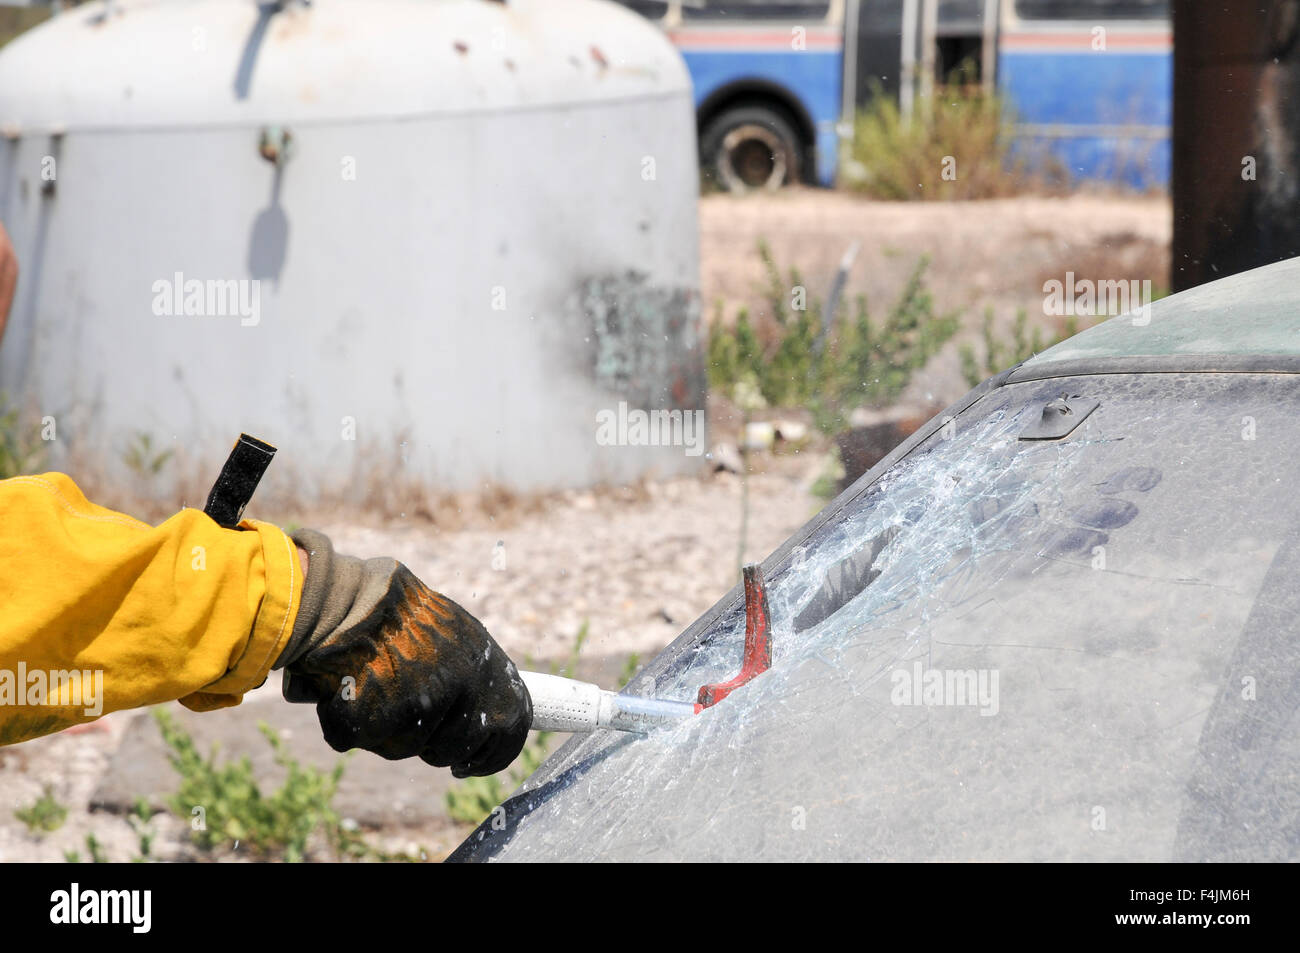 Firefighter uses an axe to break the front windshield of a car to rescue the trapped driver and passengers Stock Photo